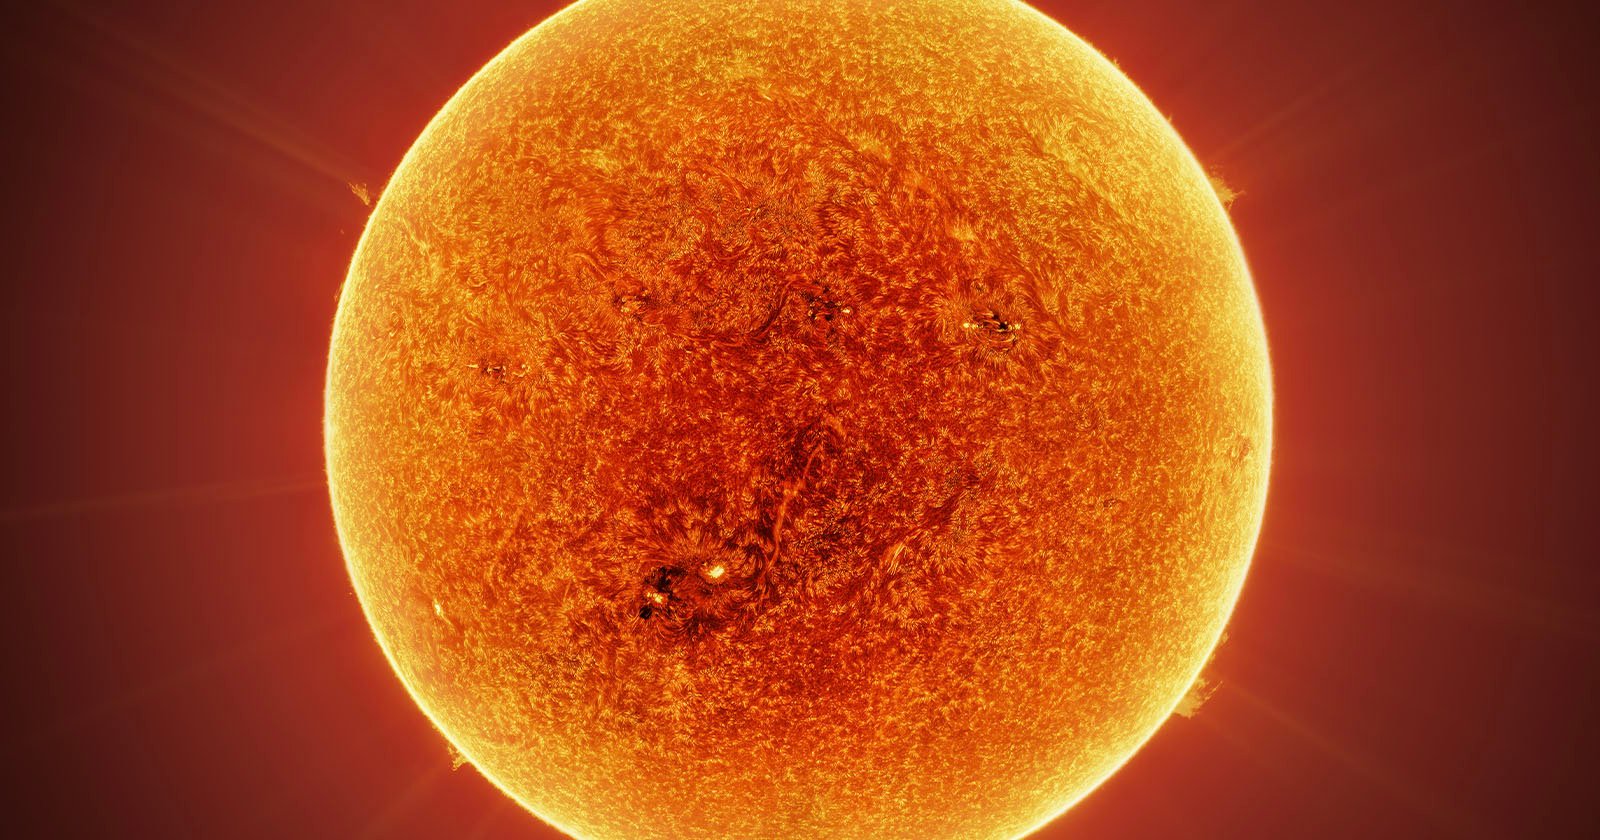 Photographers 400-Megapixel Image of the Sun is Made up of 100K Photos